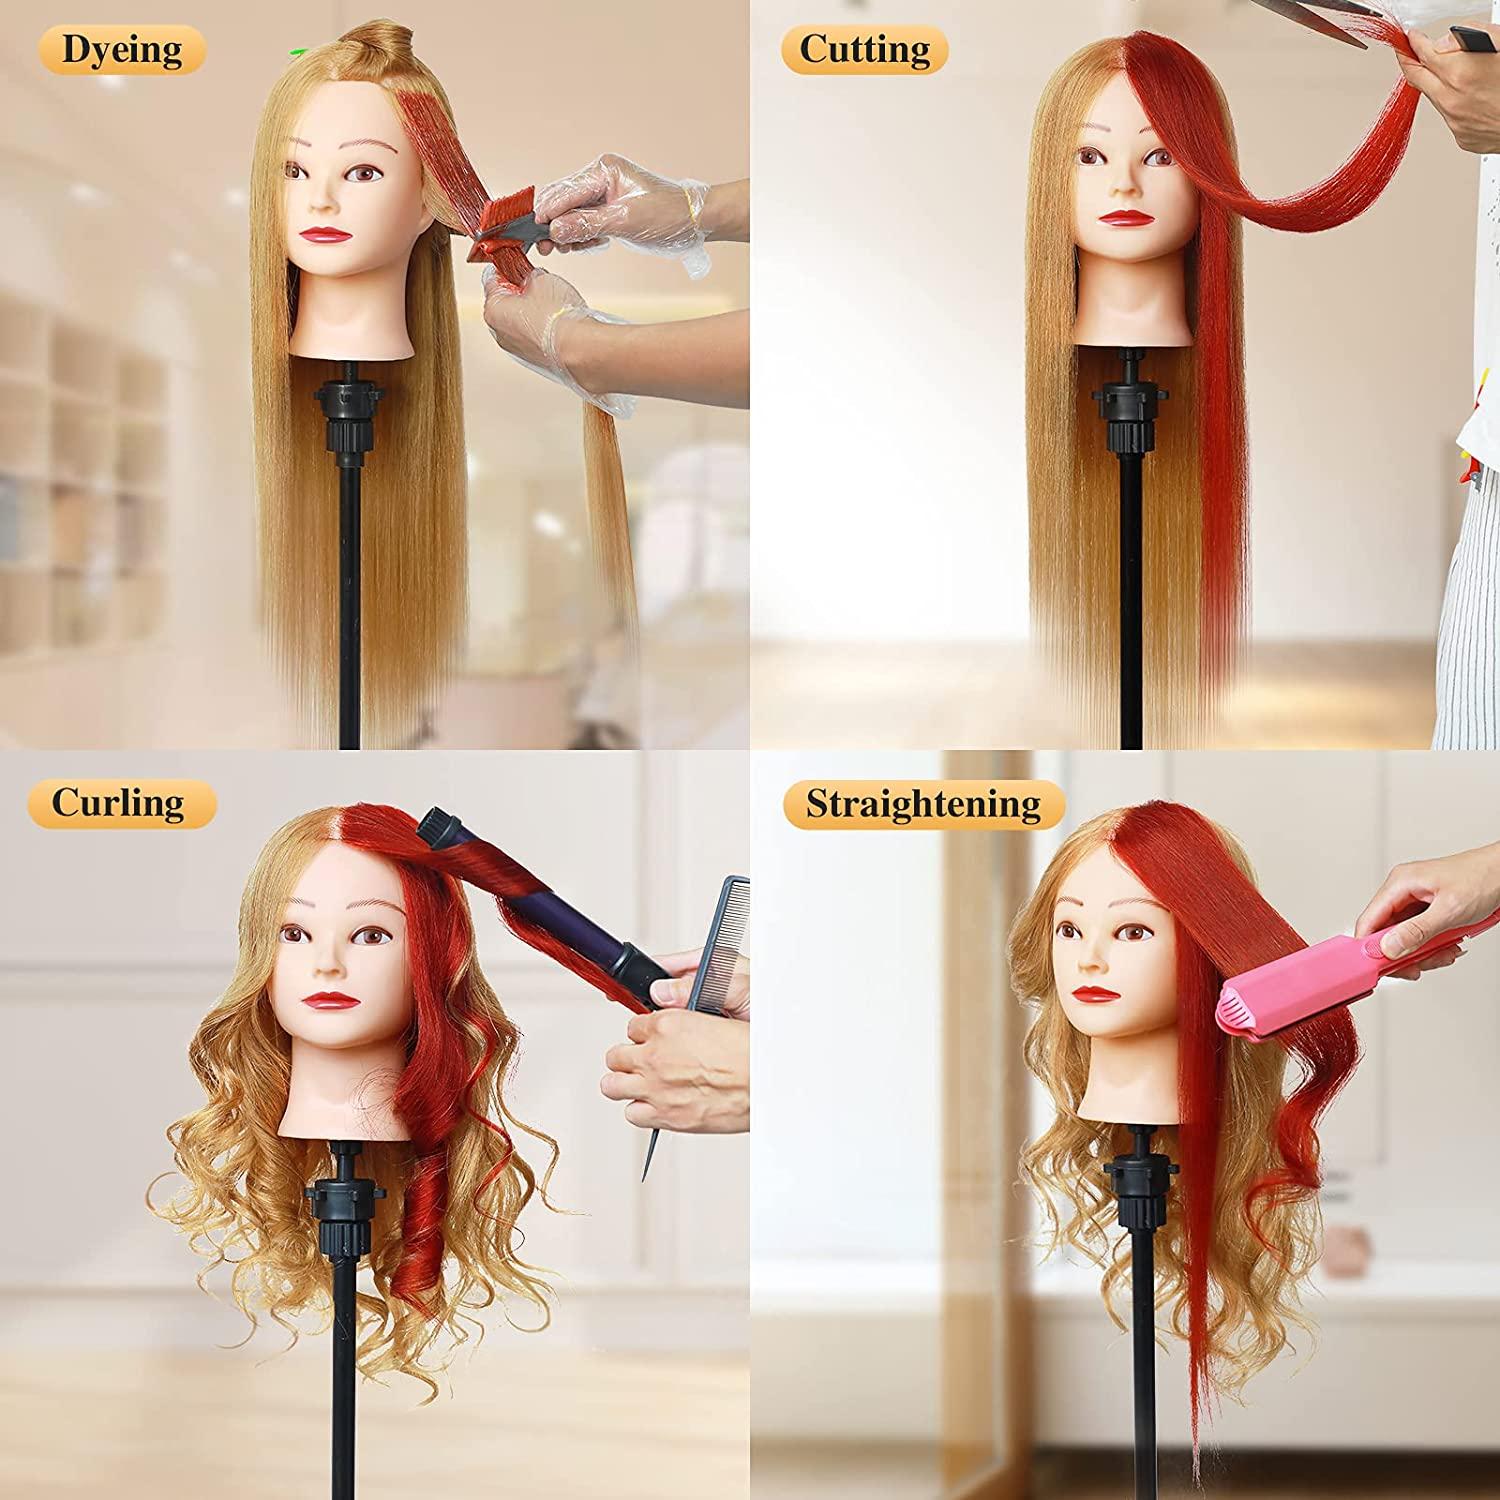 30 Brown Hair Cosmetology Mannequin Head Training Head Hairdressing  Manikin Doll Head for Hairstyles With Hair Styling Tools + Table Clamp